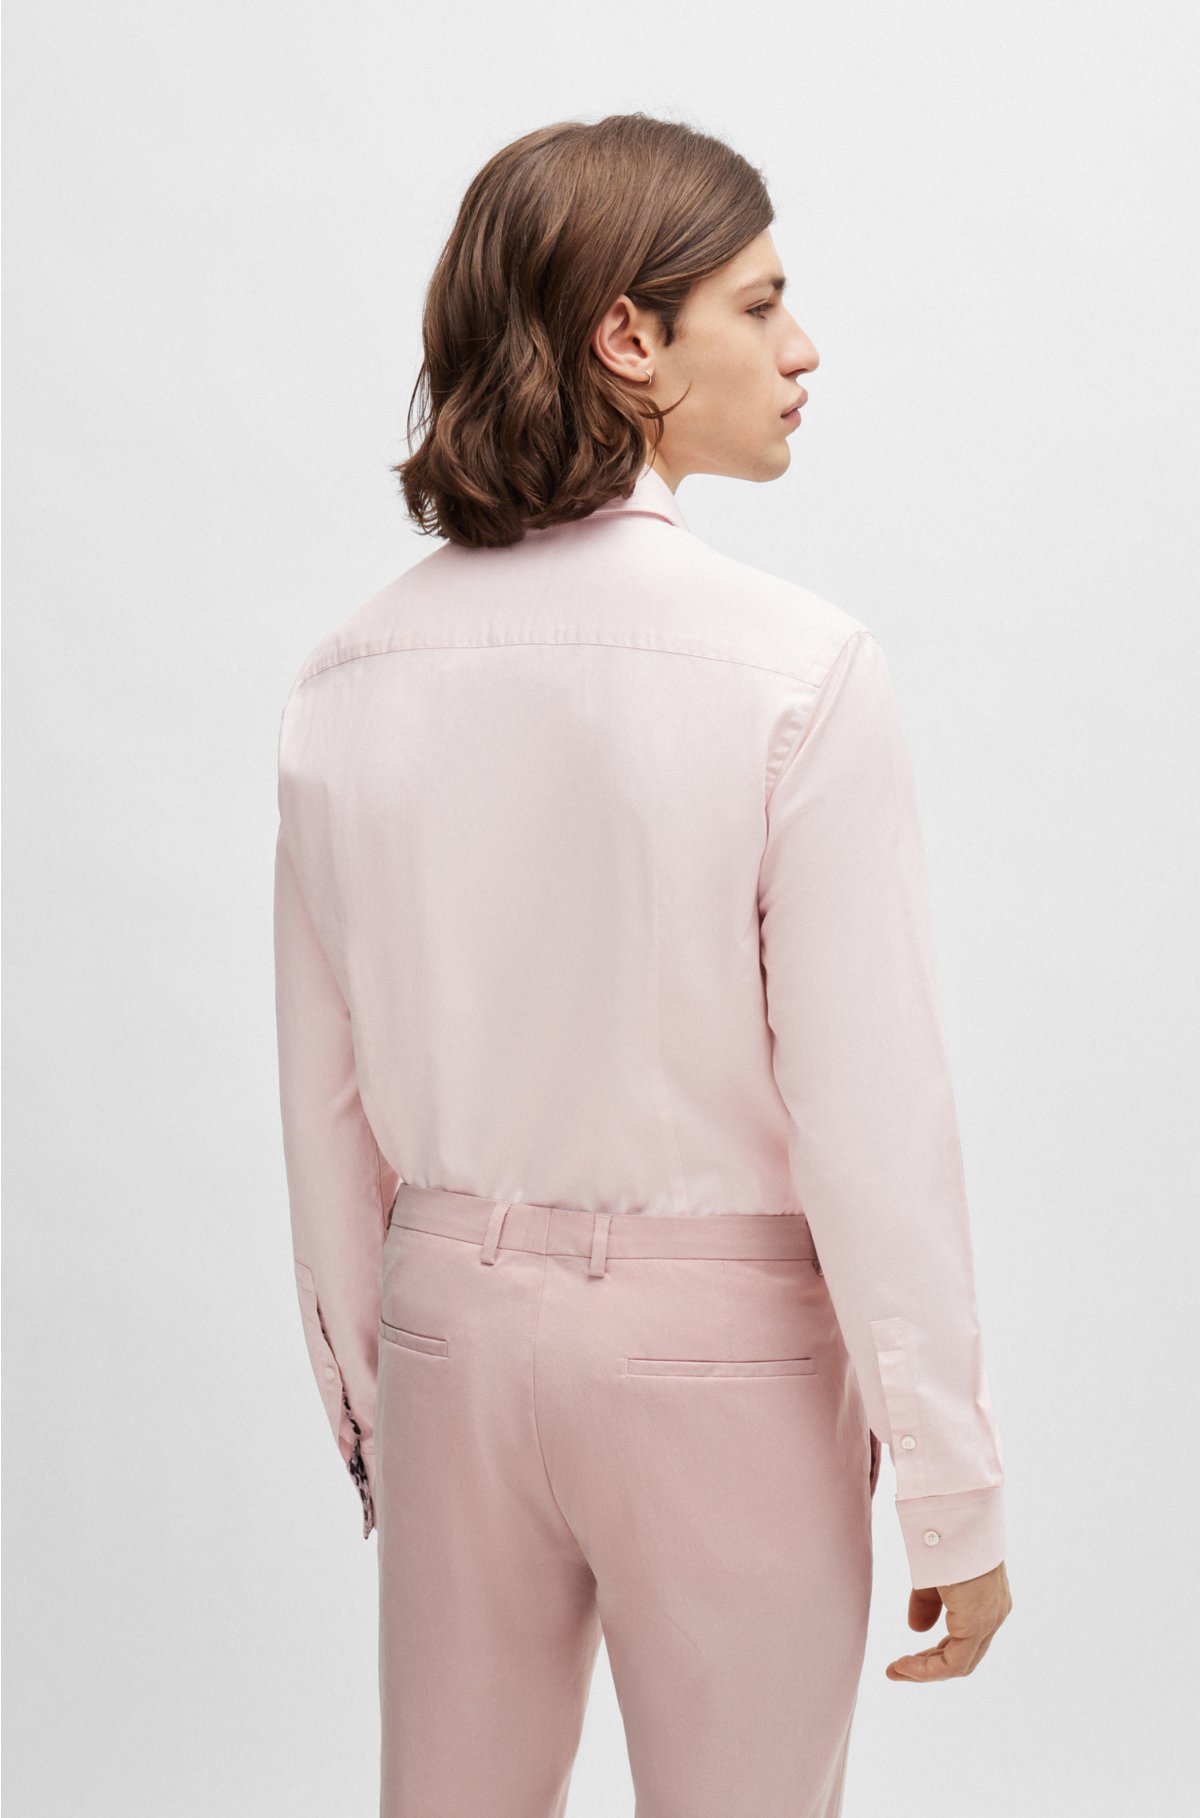 Slim-fit shirt in easy-iron Oxford cotton, light pink